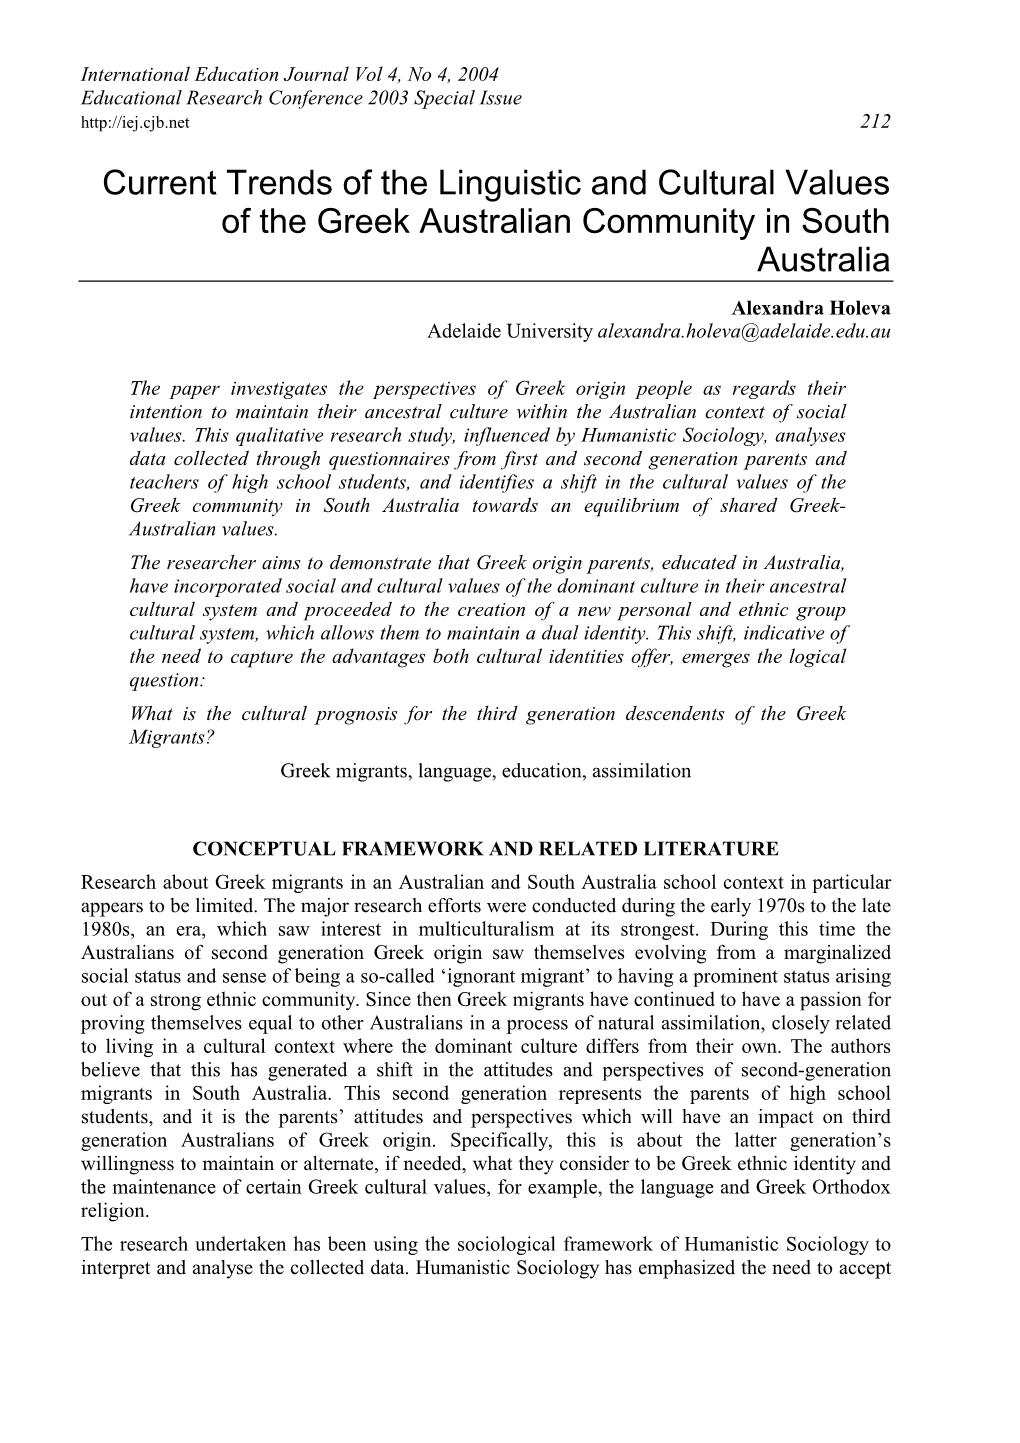 Current Trends of the Linguistic and Cultural Values of the Greek Australian Community in South Australia